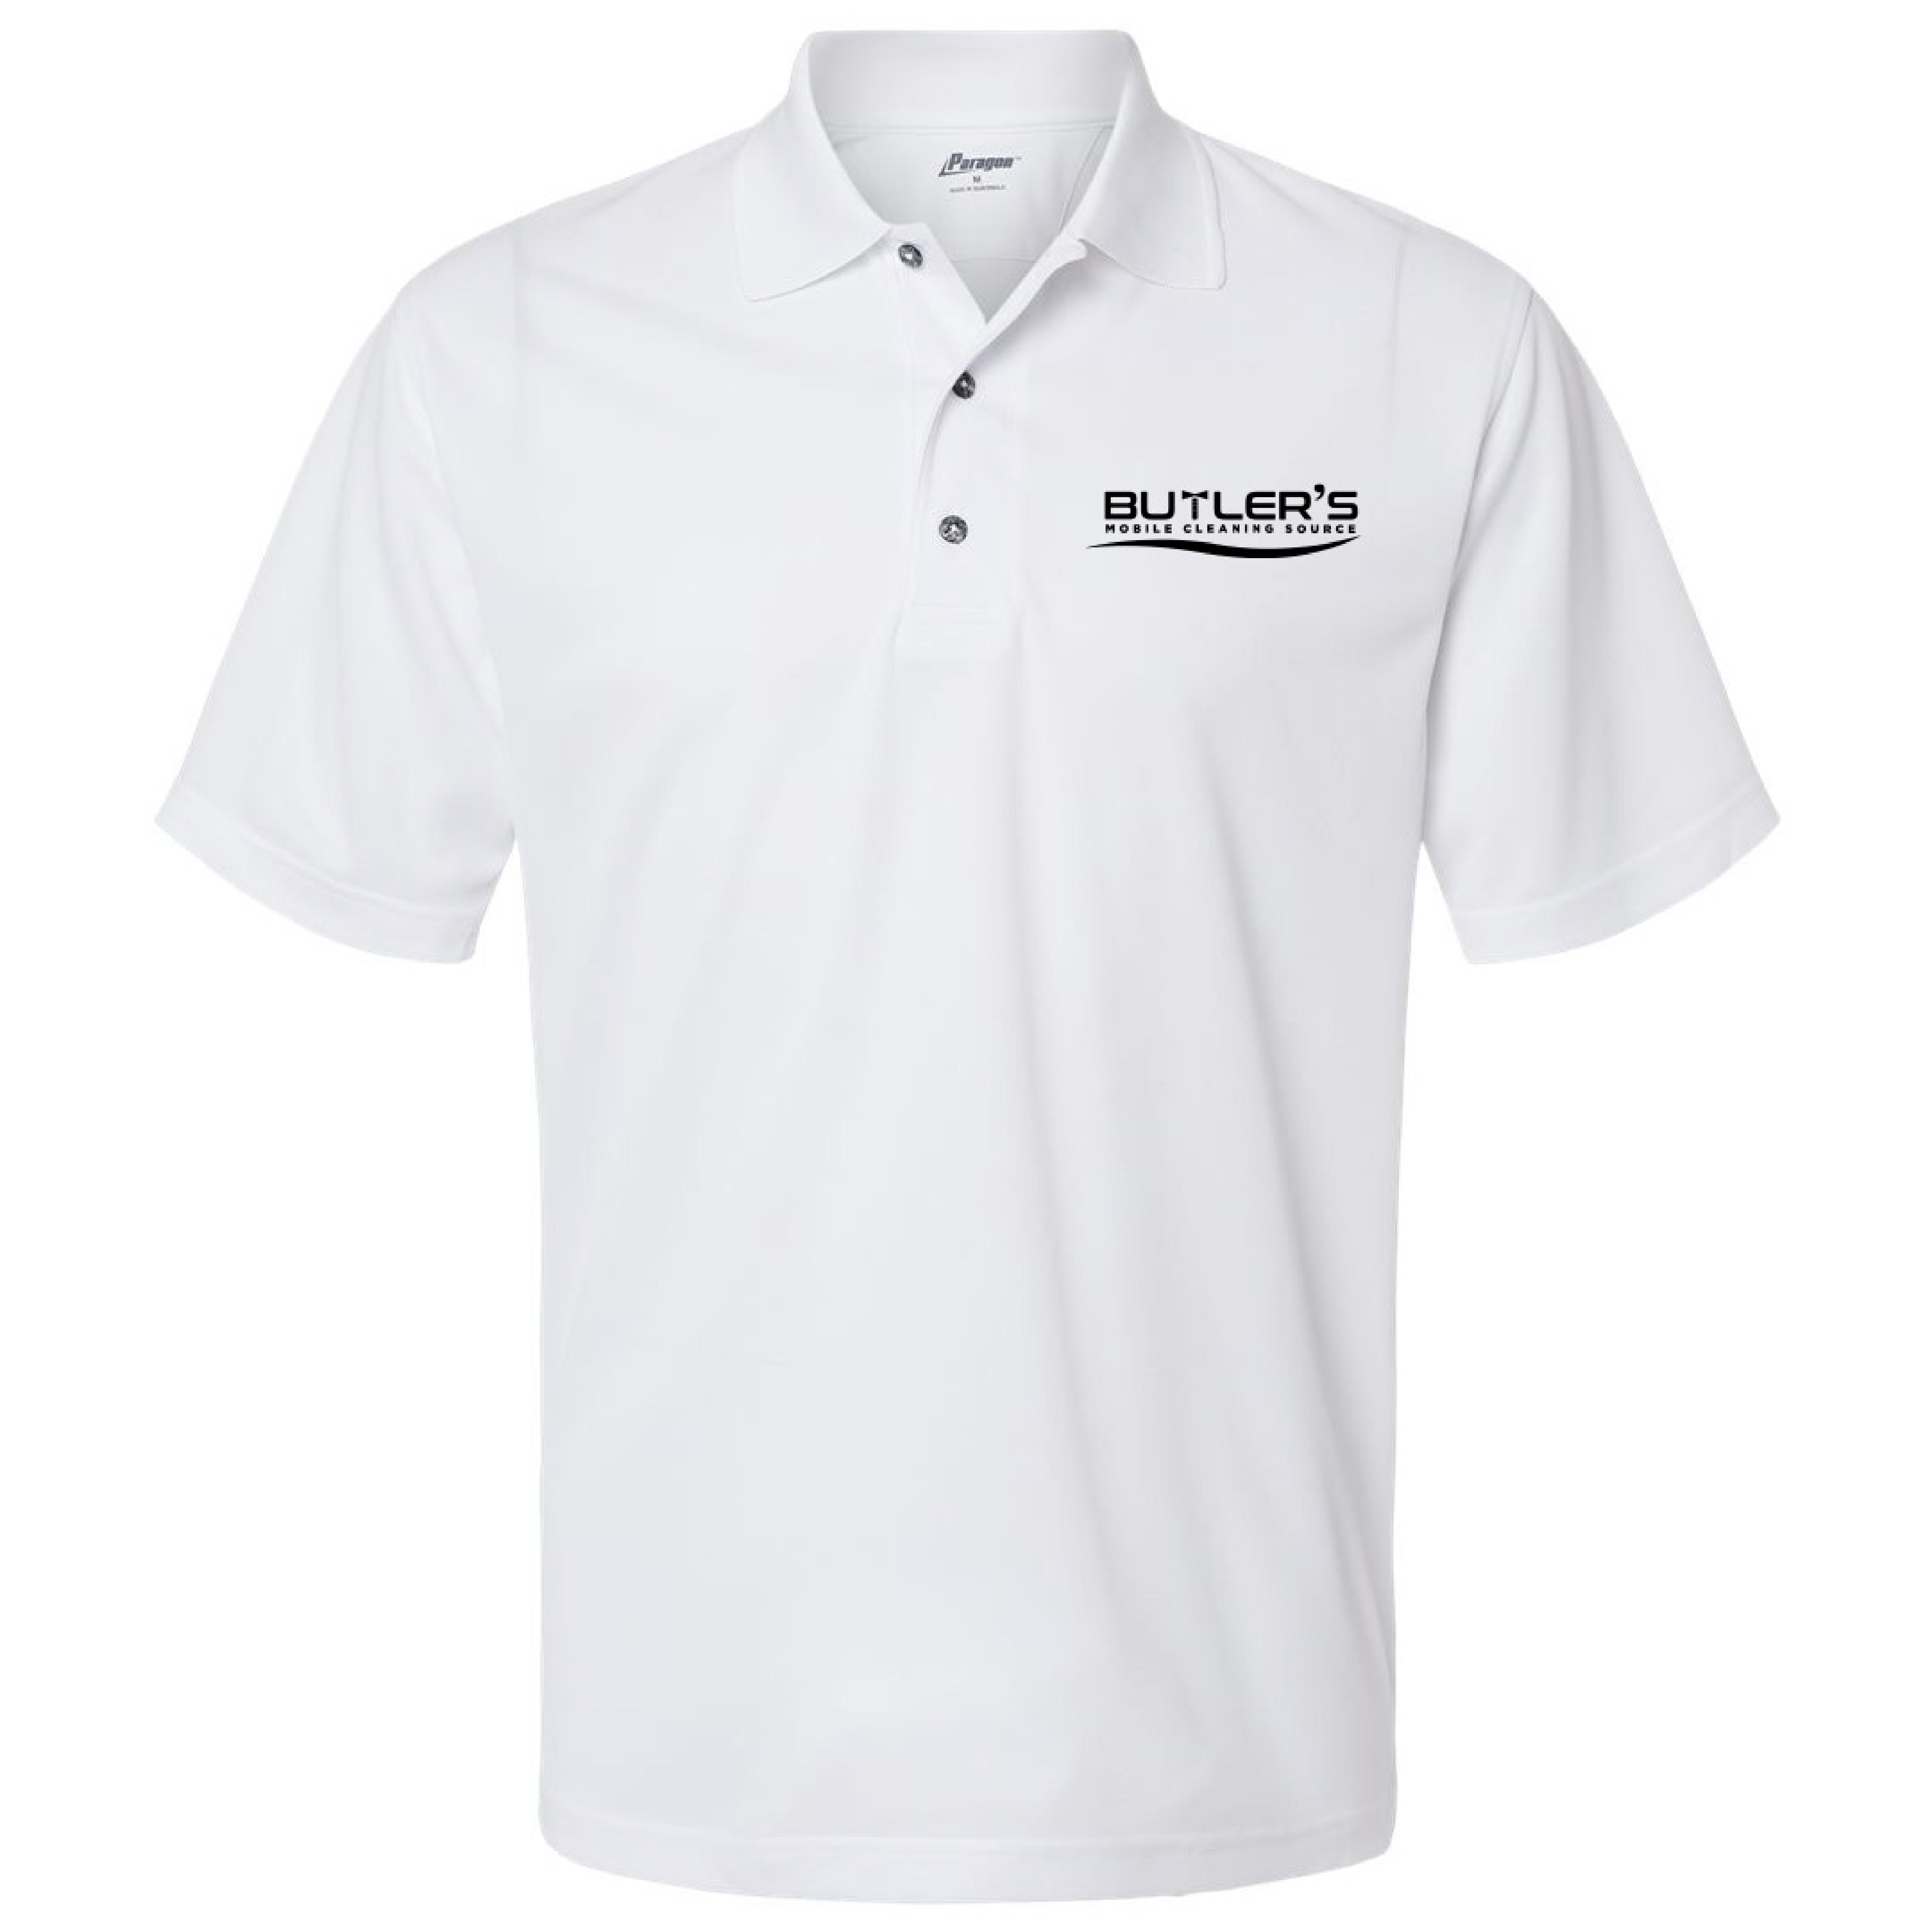 (6) Performance Polo with Embroidery Logo